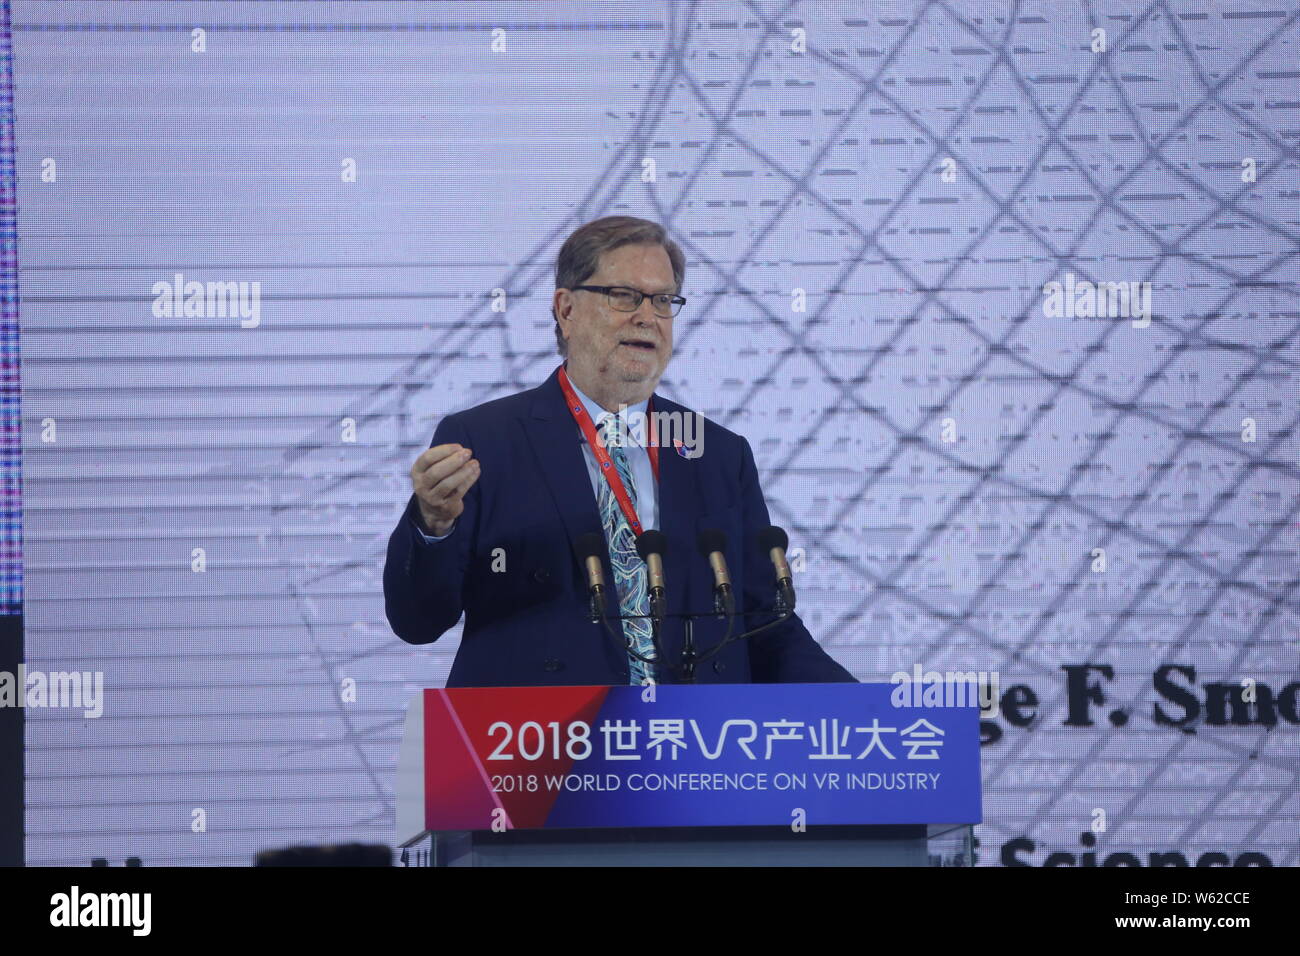 American astrophysicist and cosmologist George Smoot, the winner of 2006 Nobel Prize in Physics, speaks during the 2018 World Conference on VR Industr Stock Photo